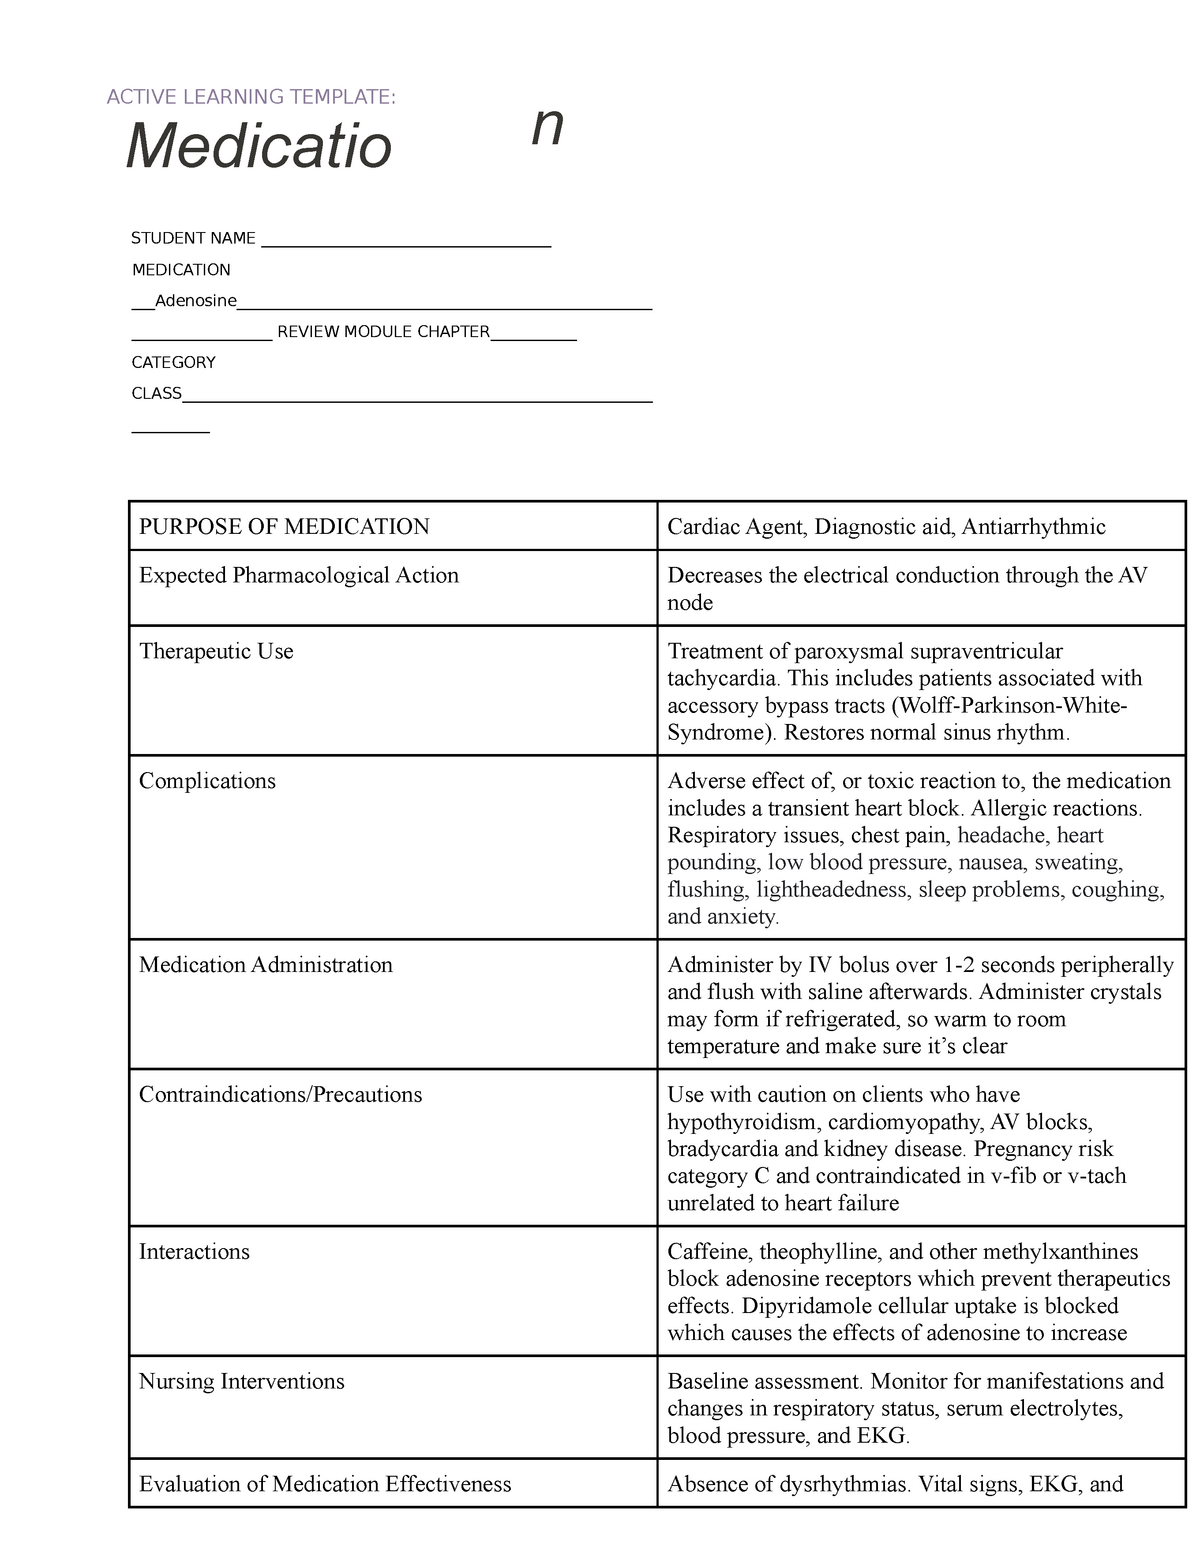 active-learning-template-medication-active-learning-template